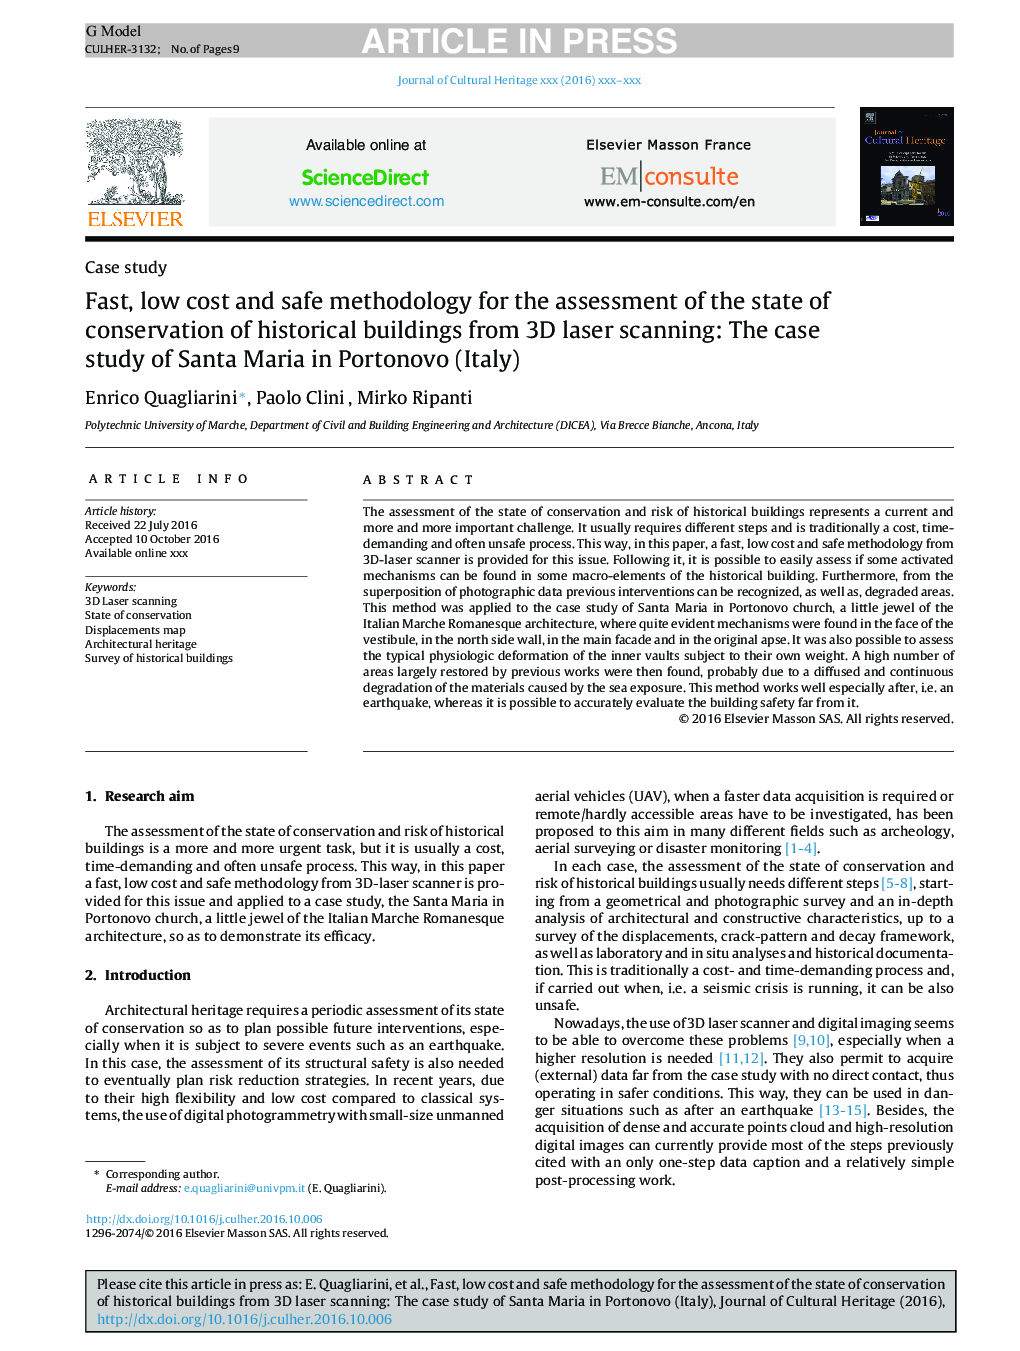 Fast, low cost and safe methodology for the assessment of the state of conservation of historical buildings from 3D laser scanning: The case study of Santa Maria in Portonovo (Italy)